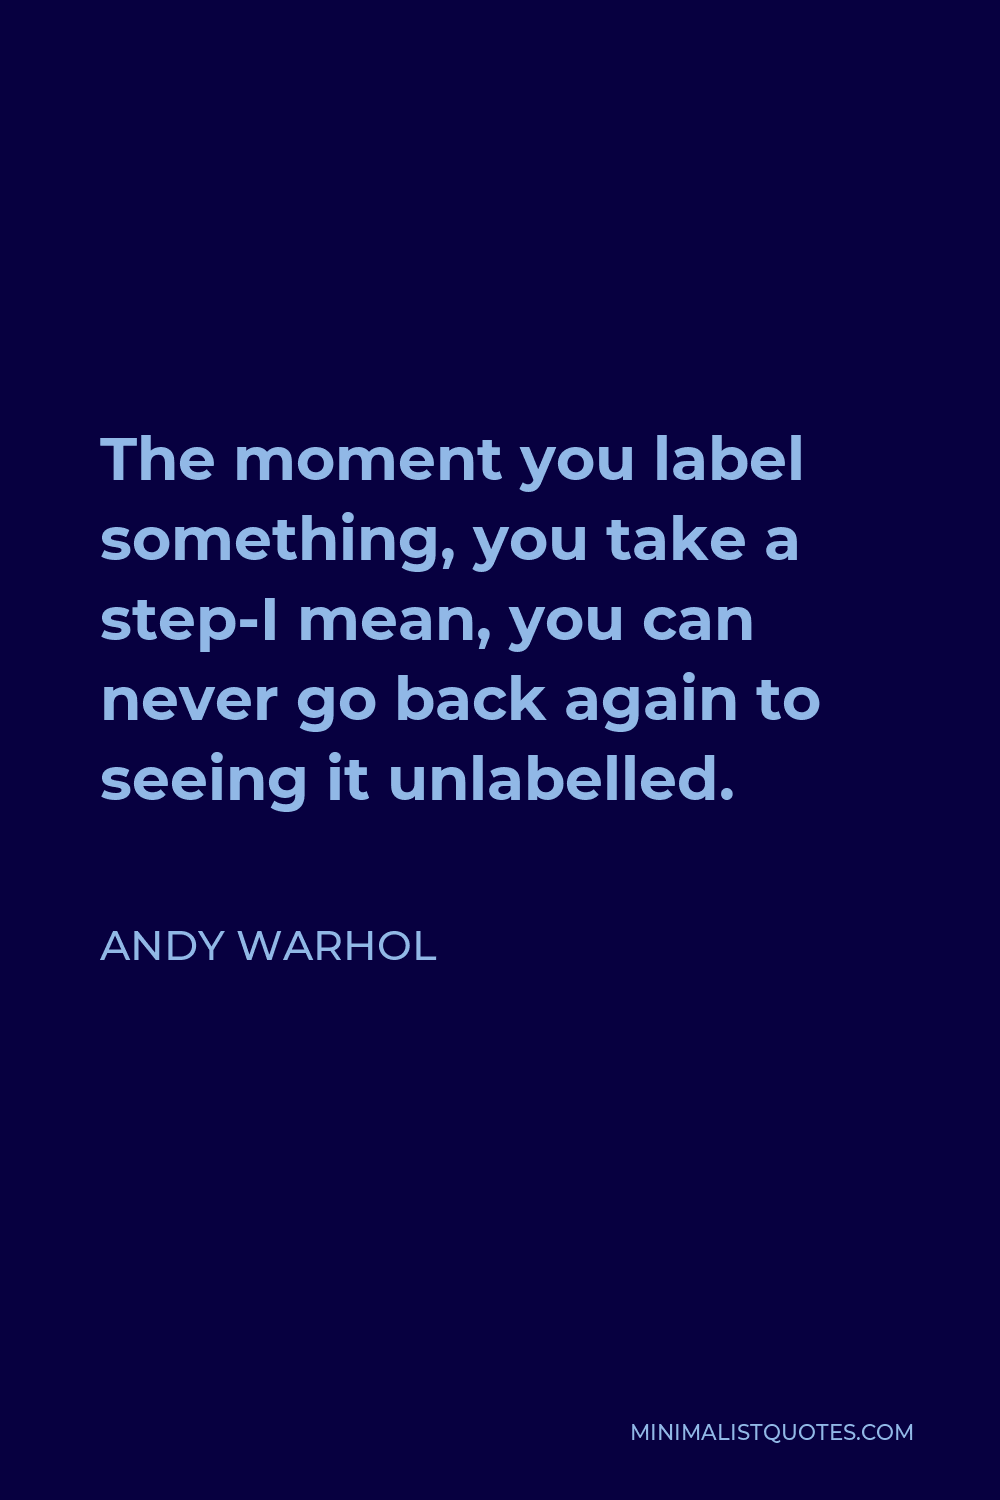 Andy Warhol Quote - The moment you label something, you take a step-I mean, you can never go back again to seeing it unlabelled.